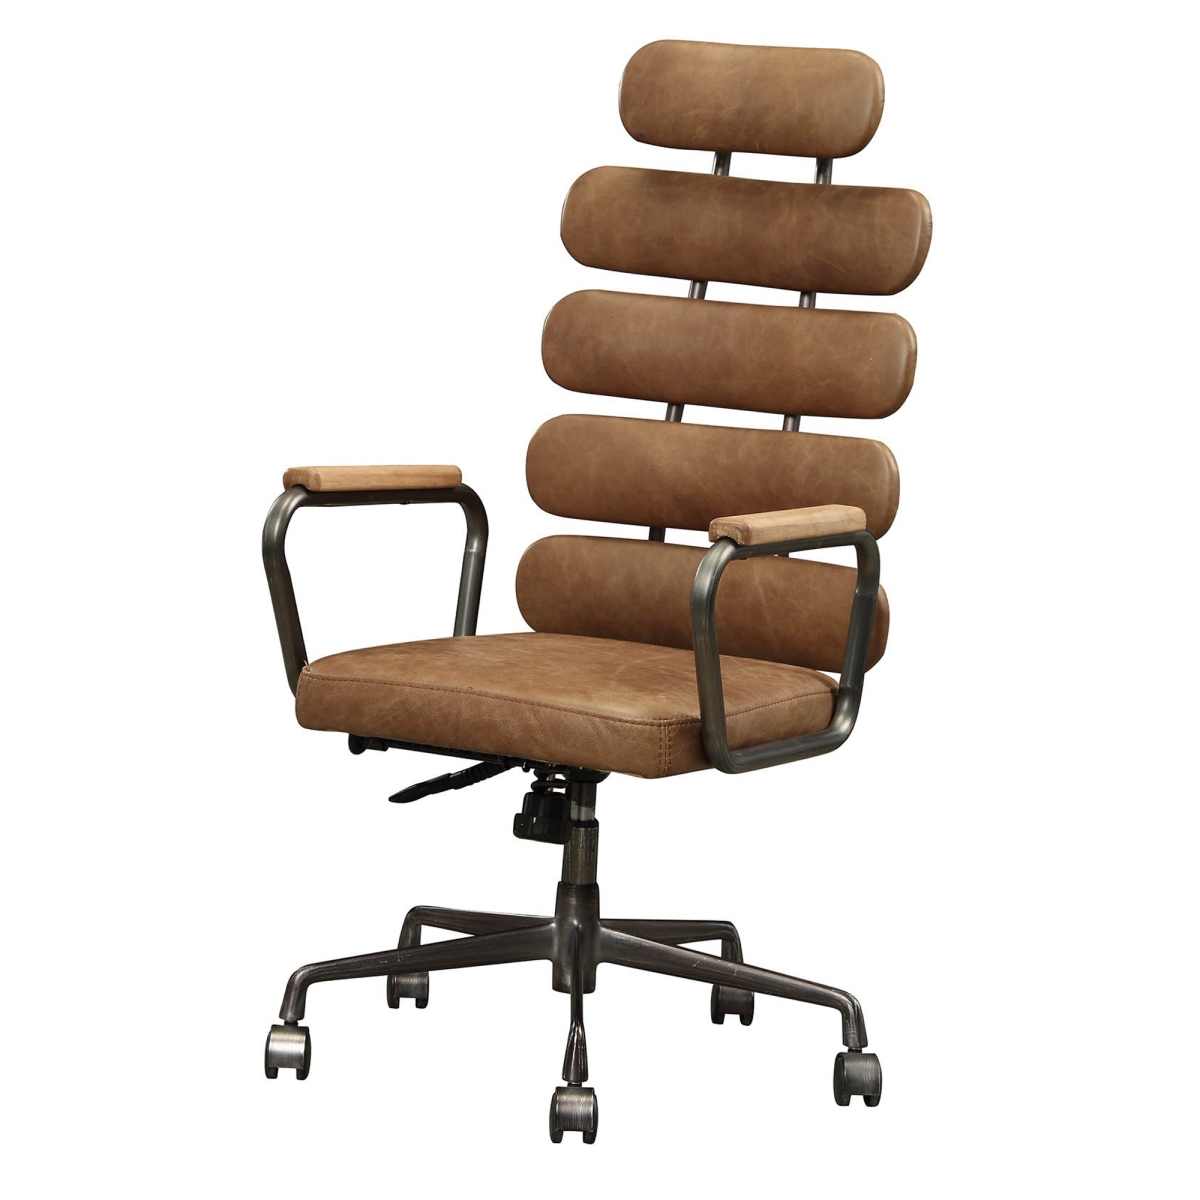 351886 Leatherette Metal Swivel Executive Chair With Five Horizontal Panels Backrest, Brown